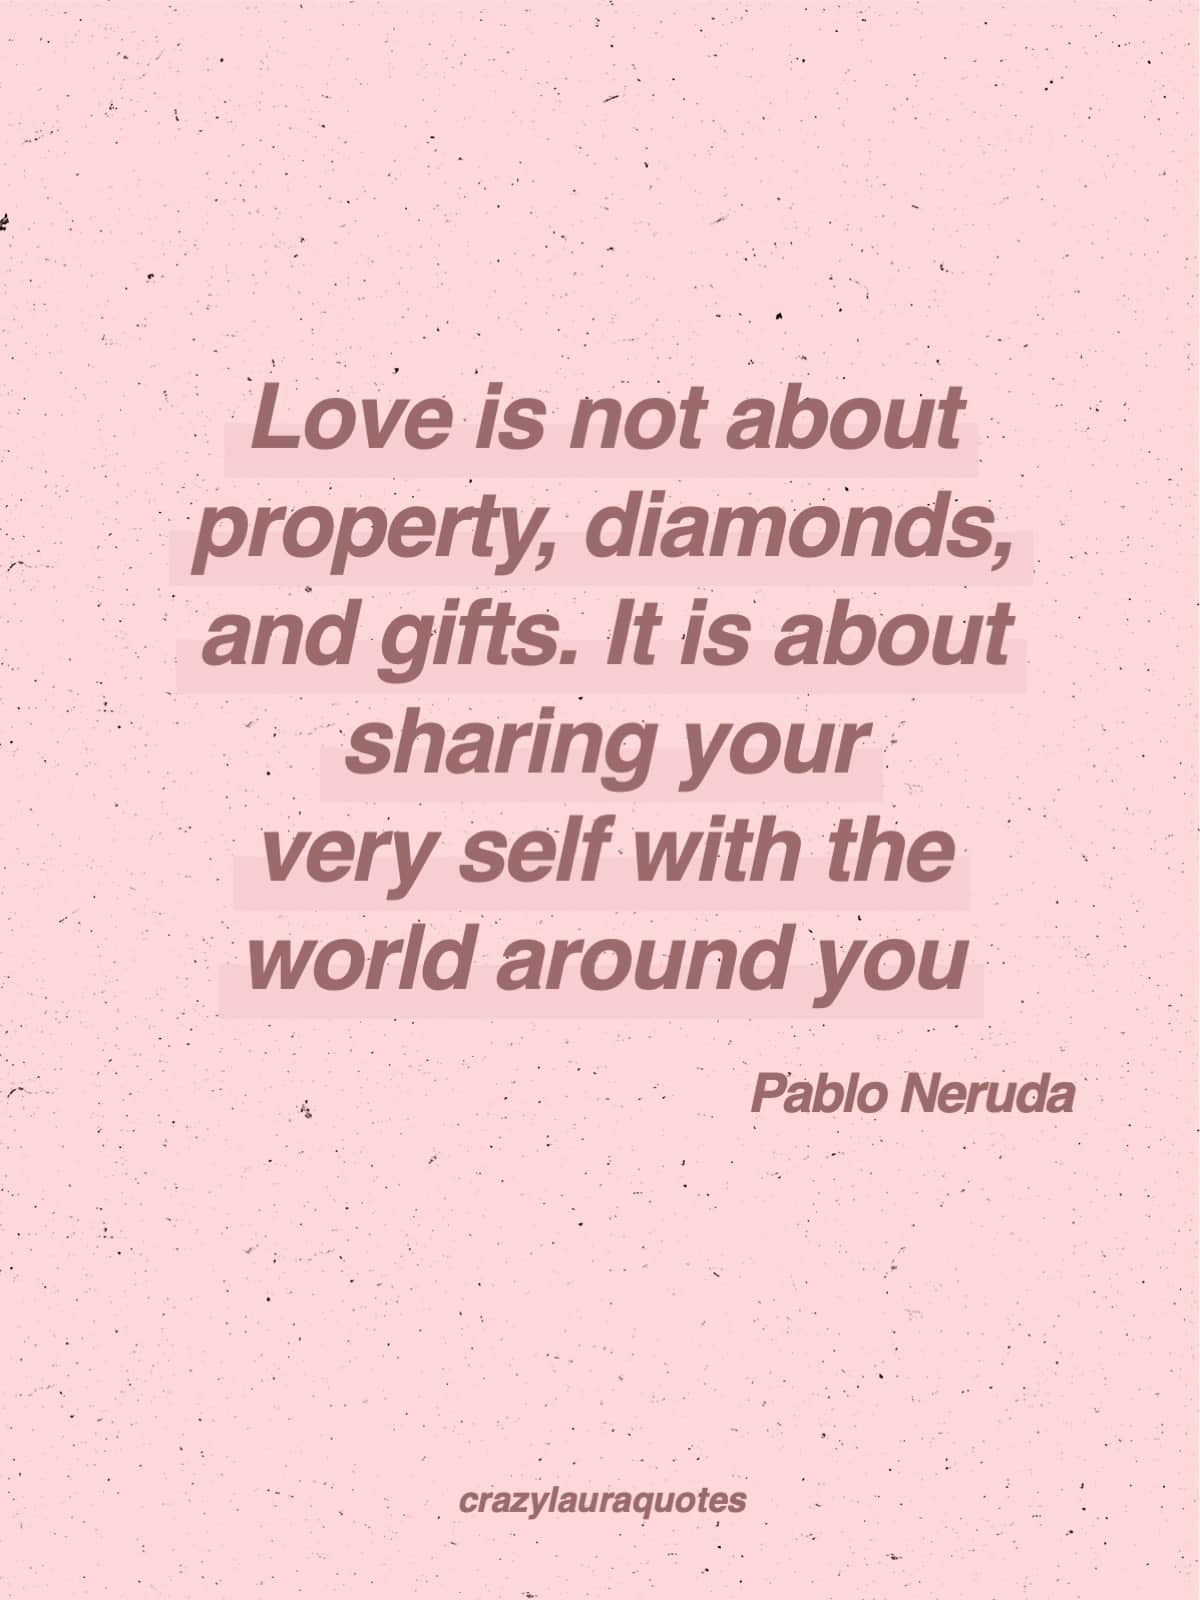 share love with others around you quote